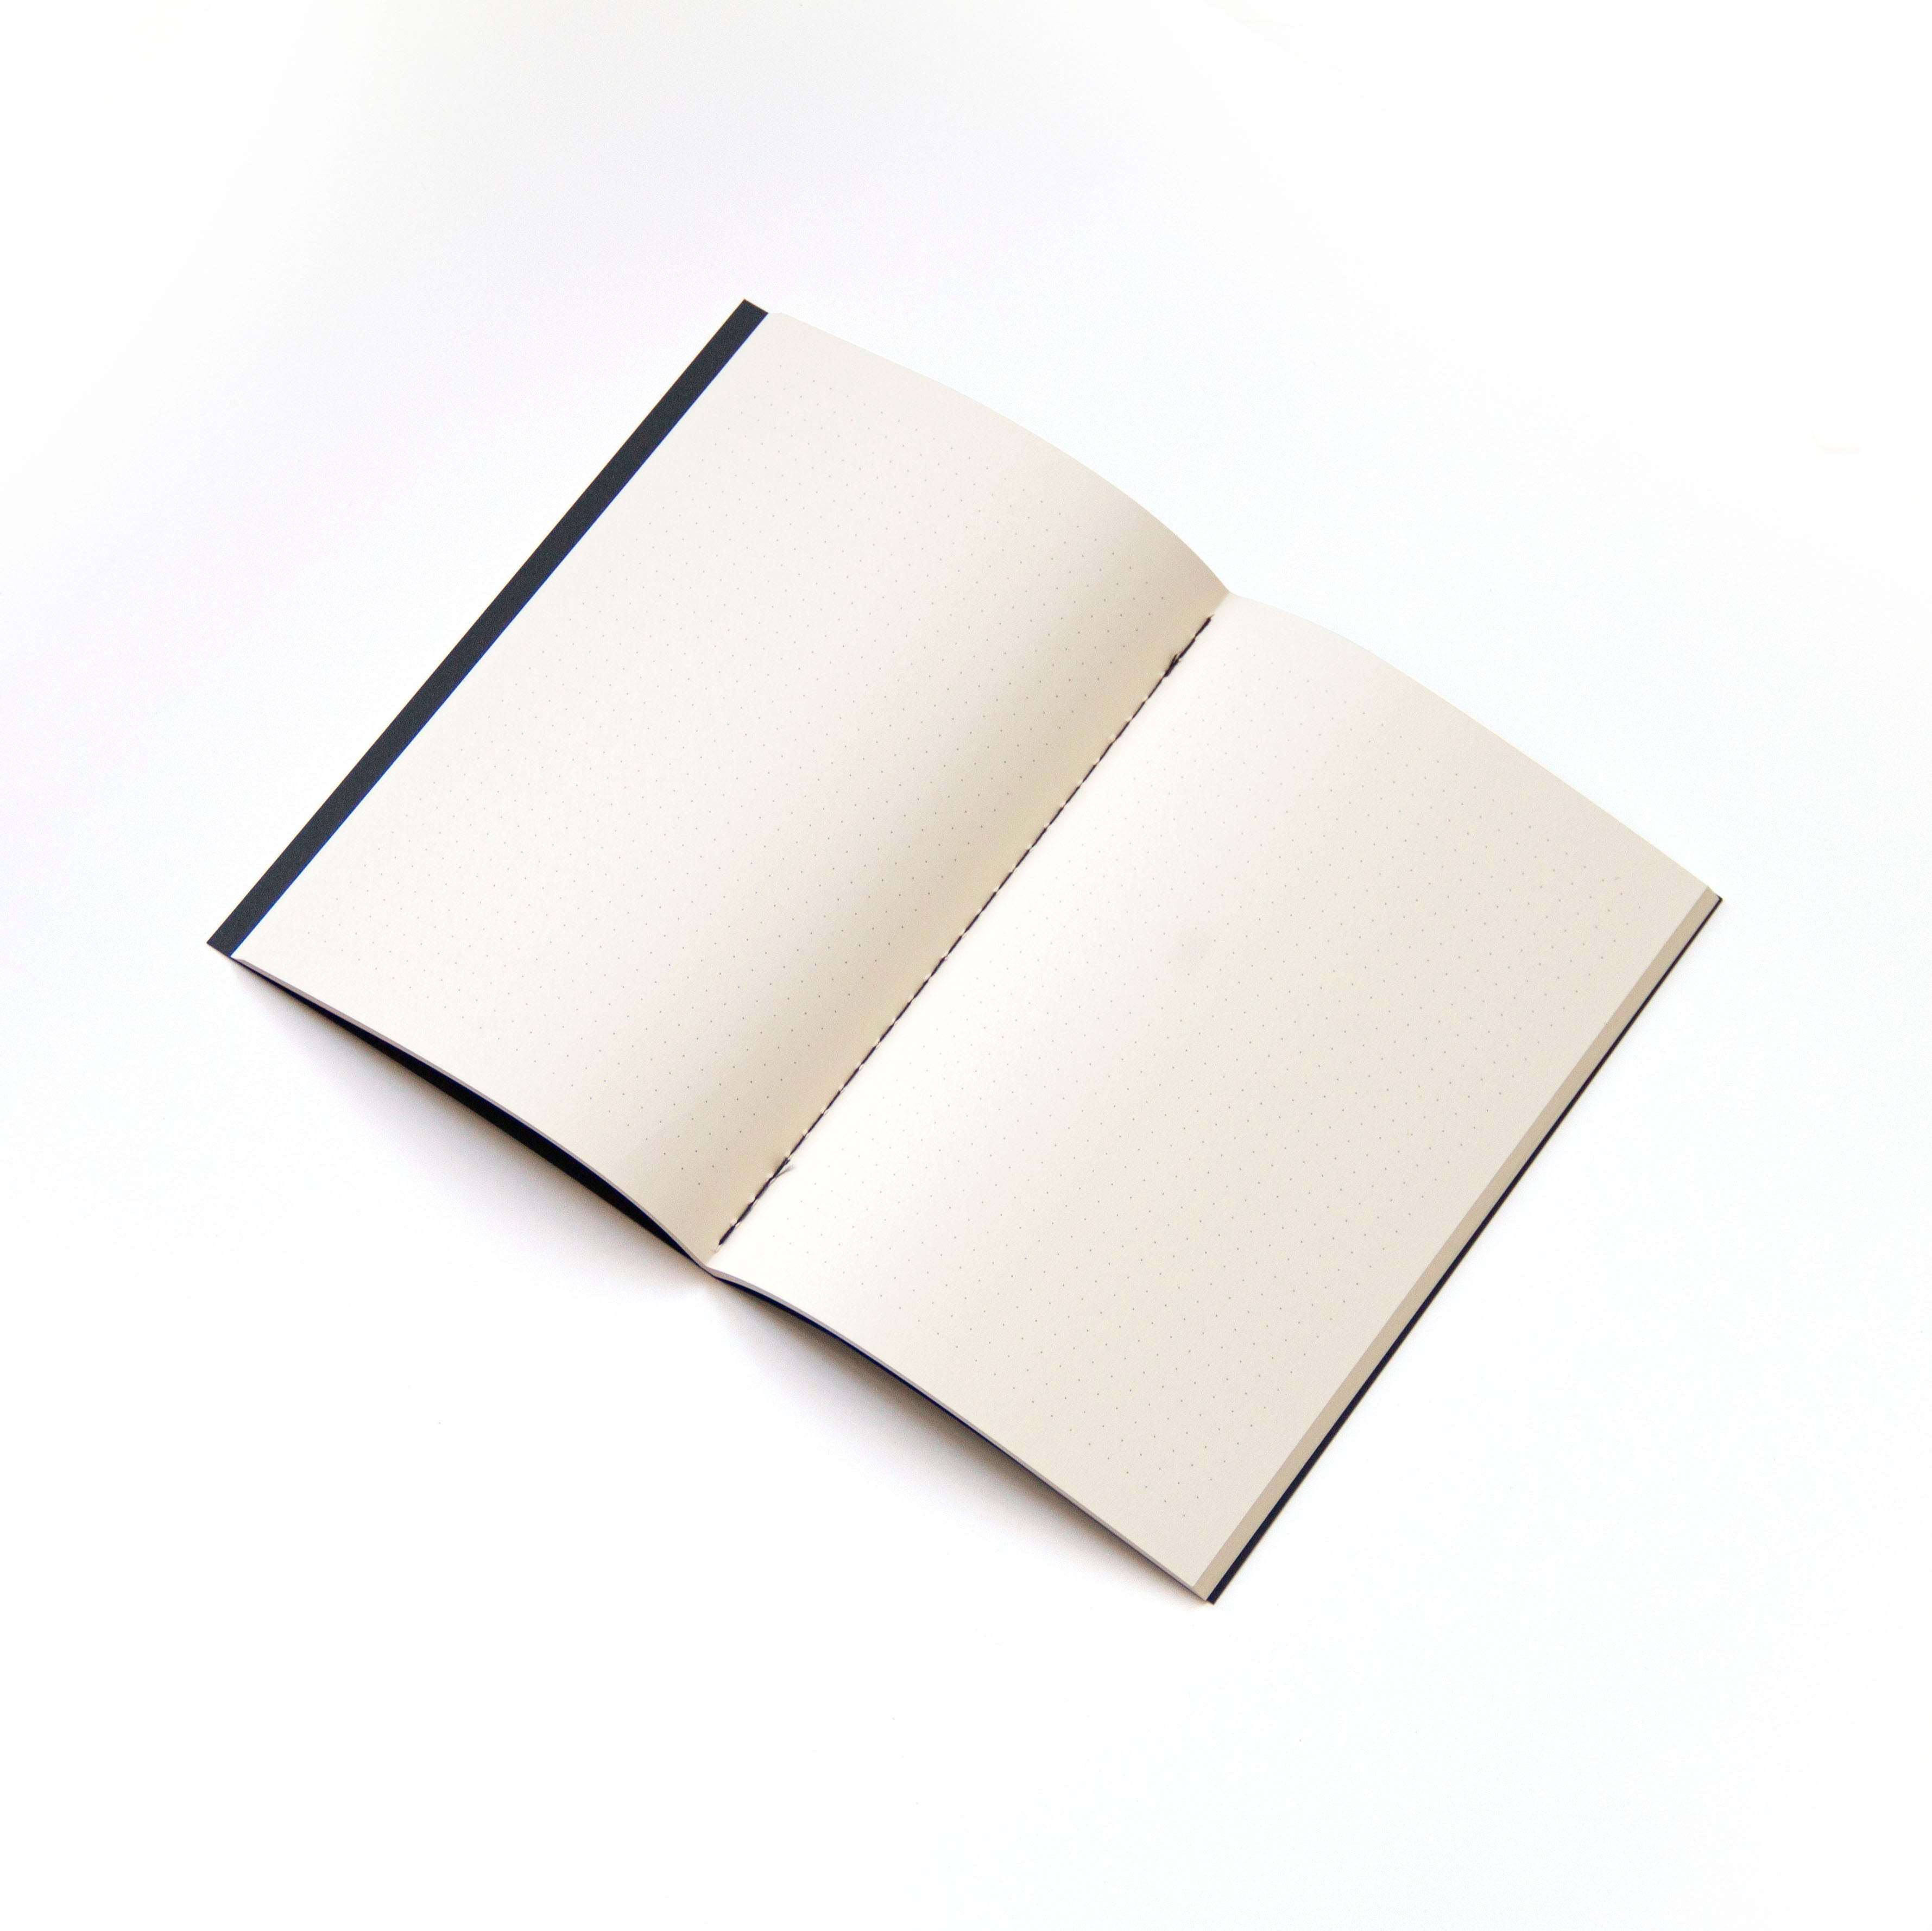 OCTÀGON DESIGN | Open &quot;Adult content&quot; dotted notebook. Binding with black thread.